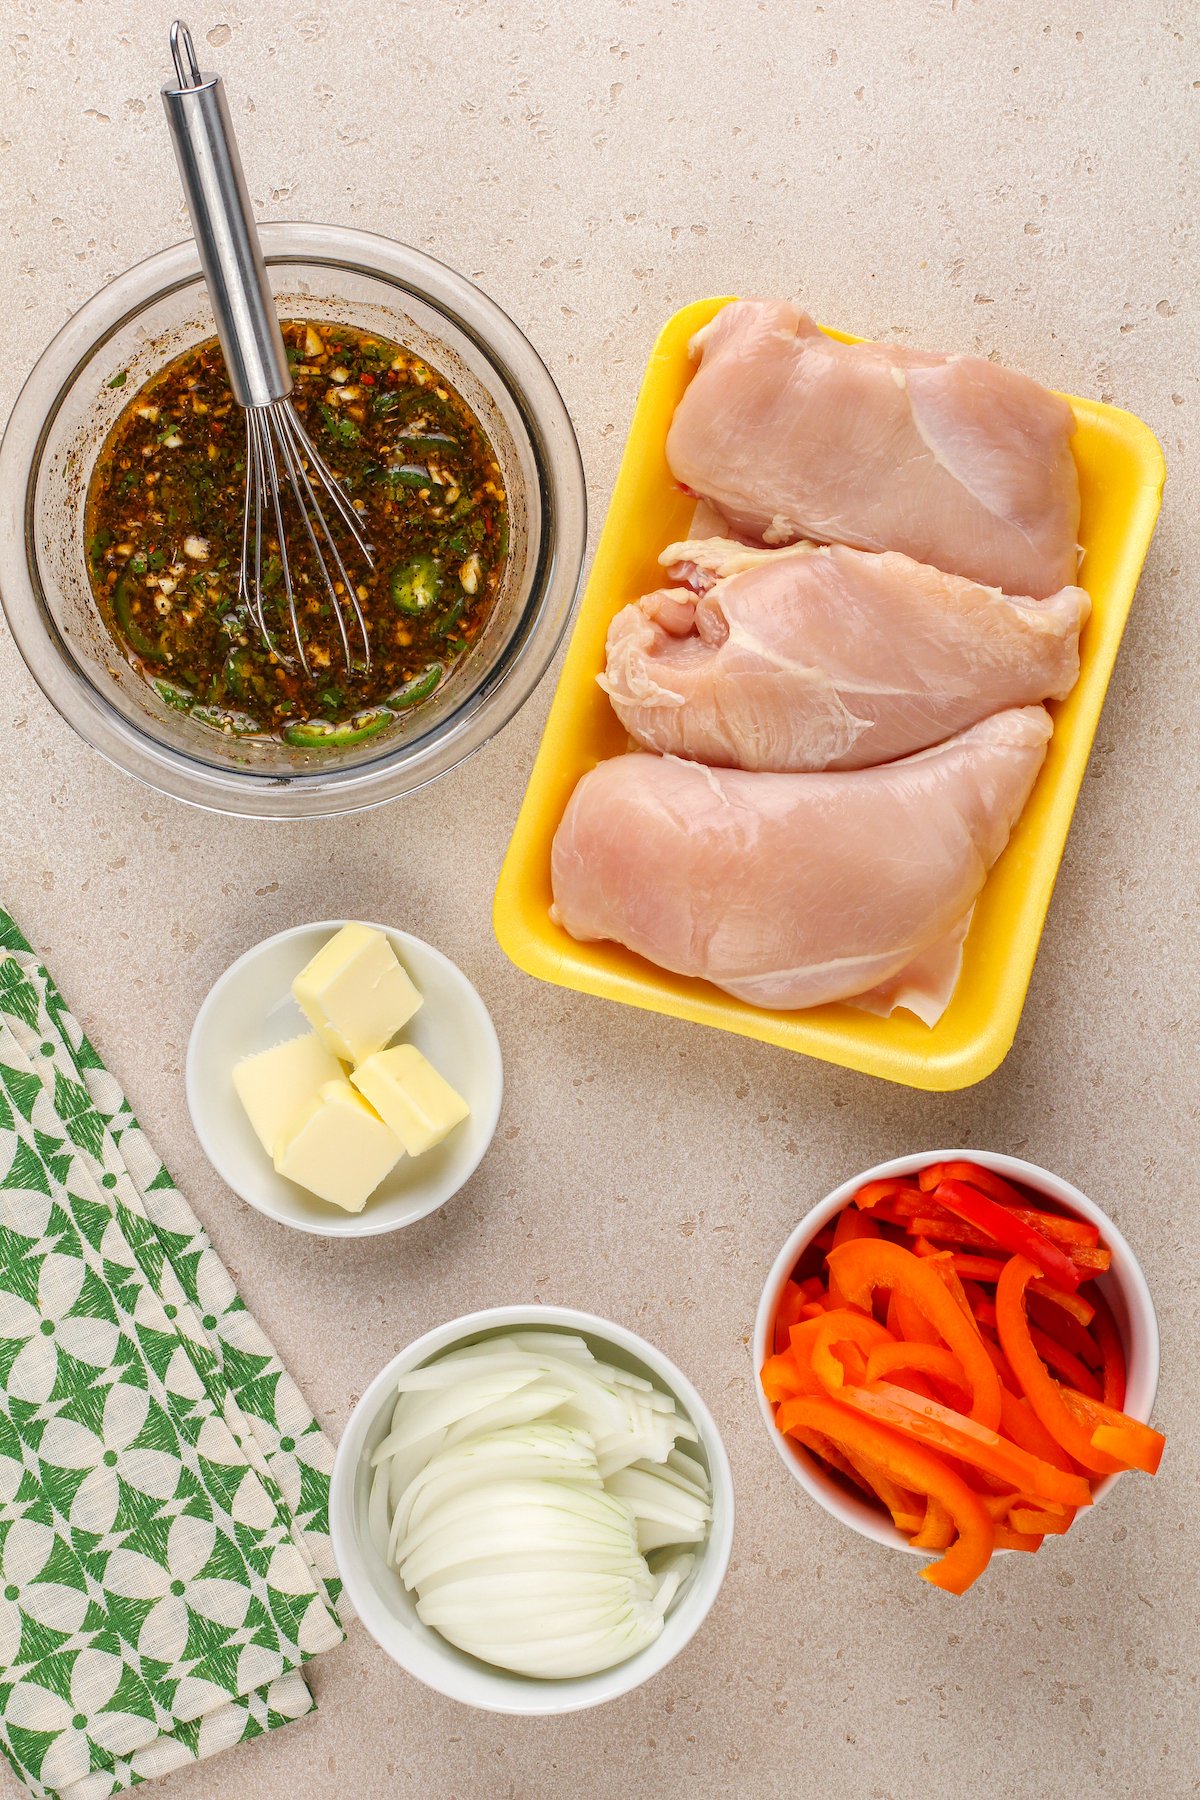 Ingredients for homemade chicken fajitas, arranged on a work surface with a cloth napkin.